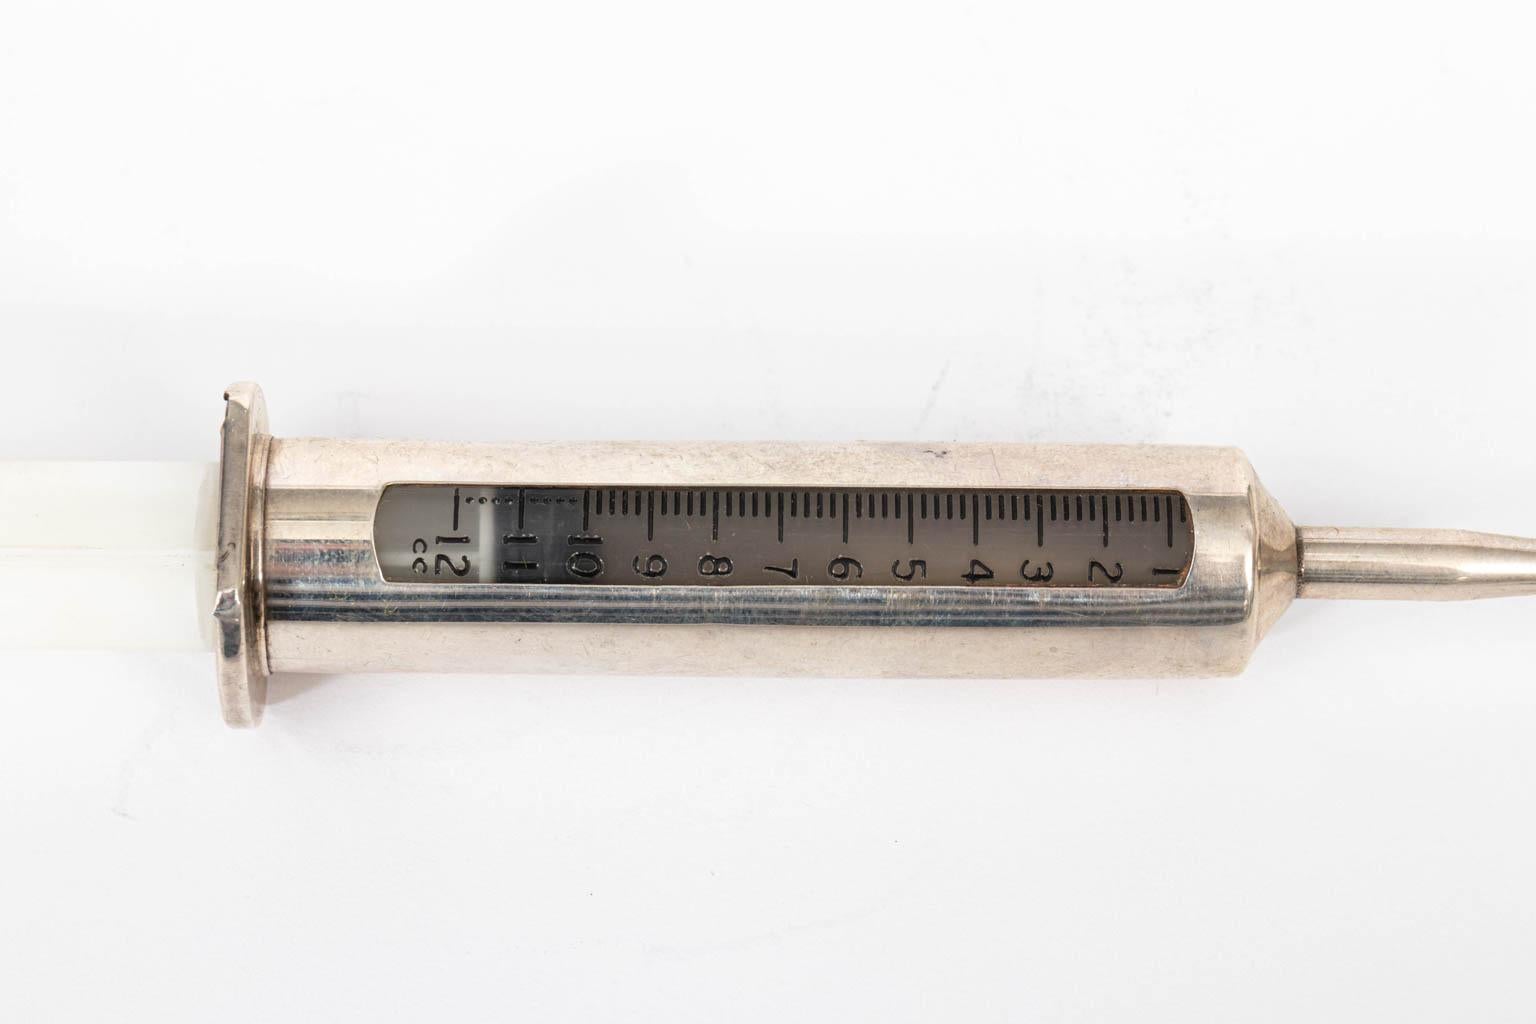 Vintage sterling silver vermouth dispenser in the form of a syringe by Gorham, circa 1960s. These were called 